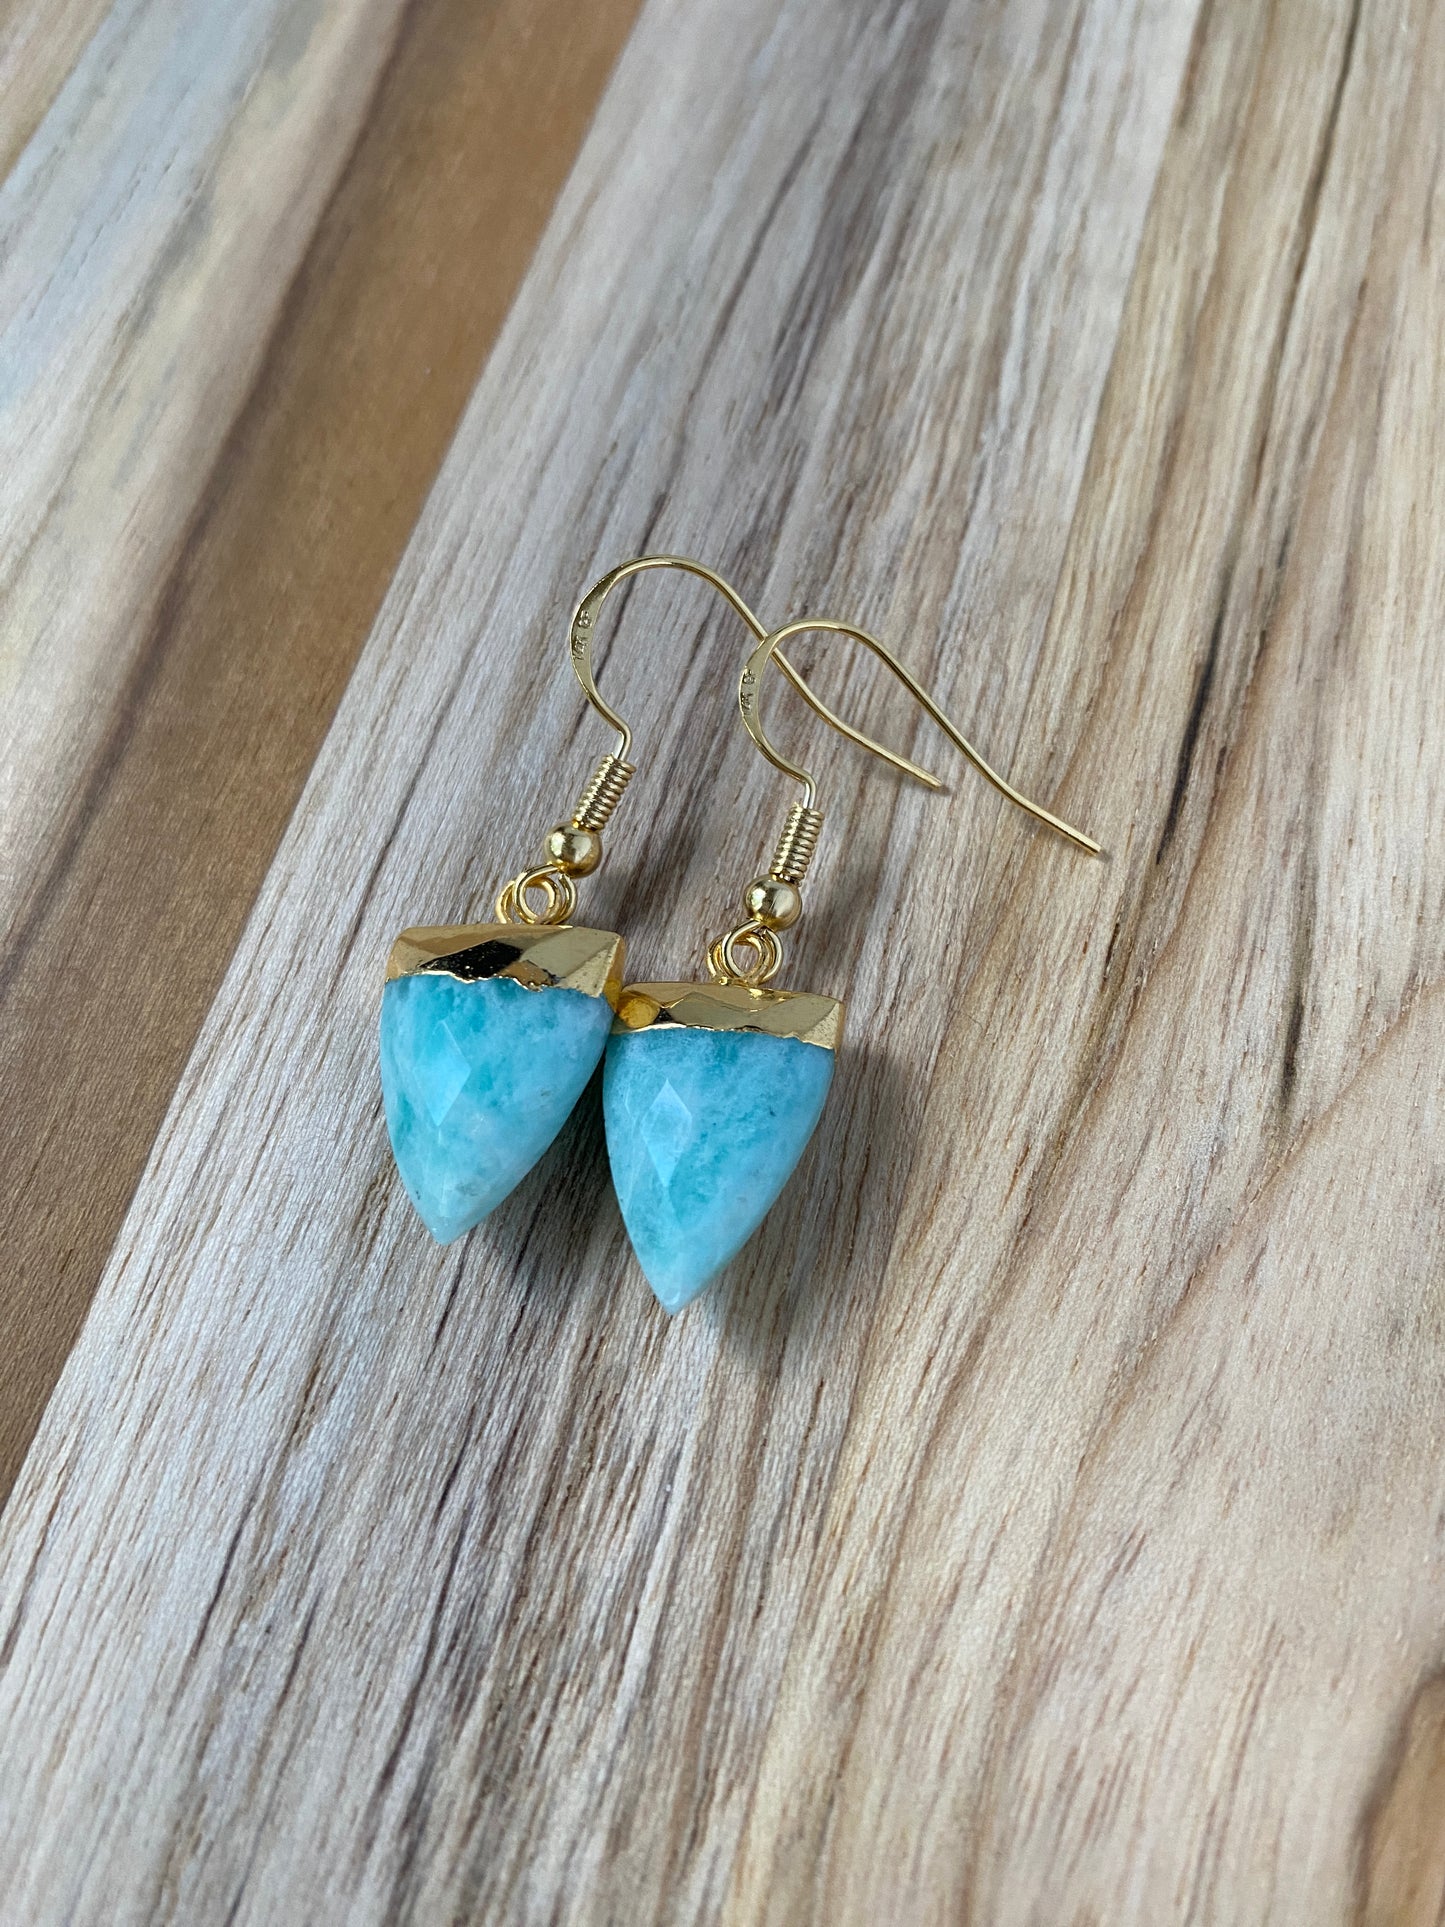 Trillion Shape Amazonite Dangle Earrings with Gold